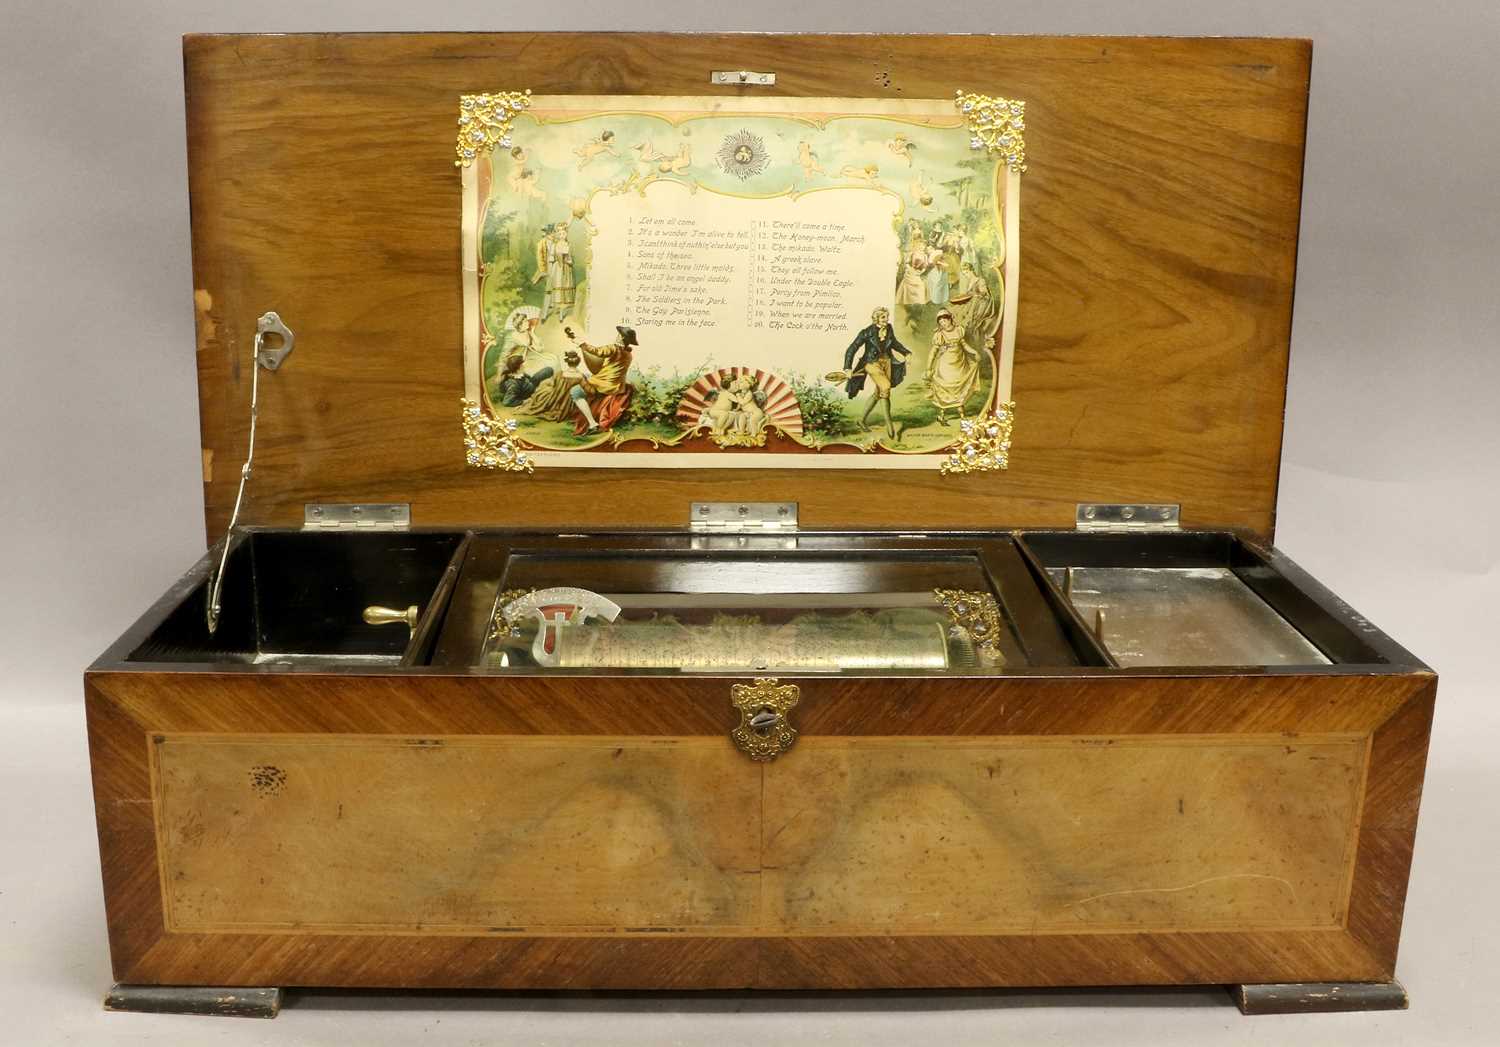 Lot 62 - A Two-Per-Turn Musical Box By B. H. Abrahams